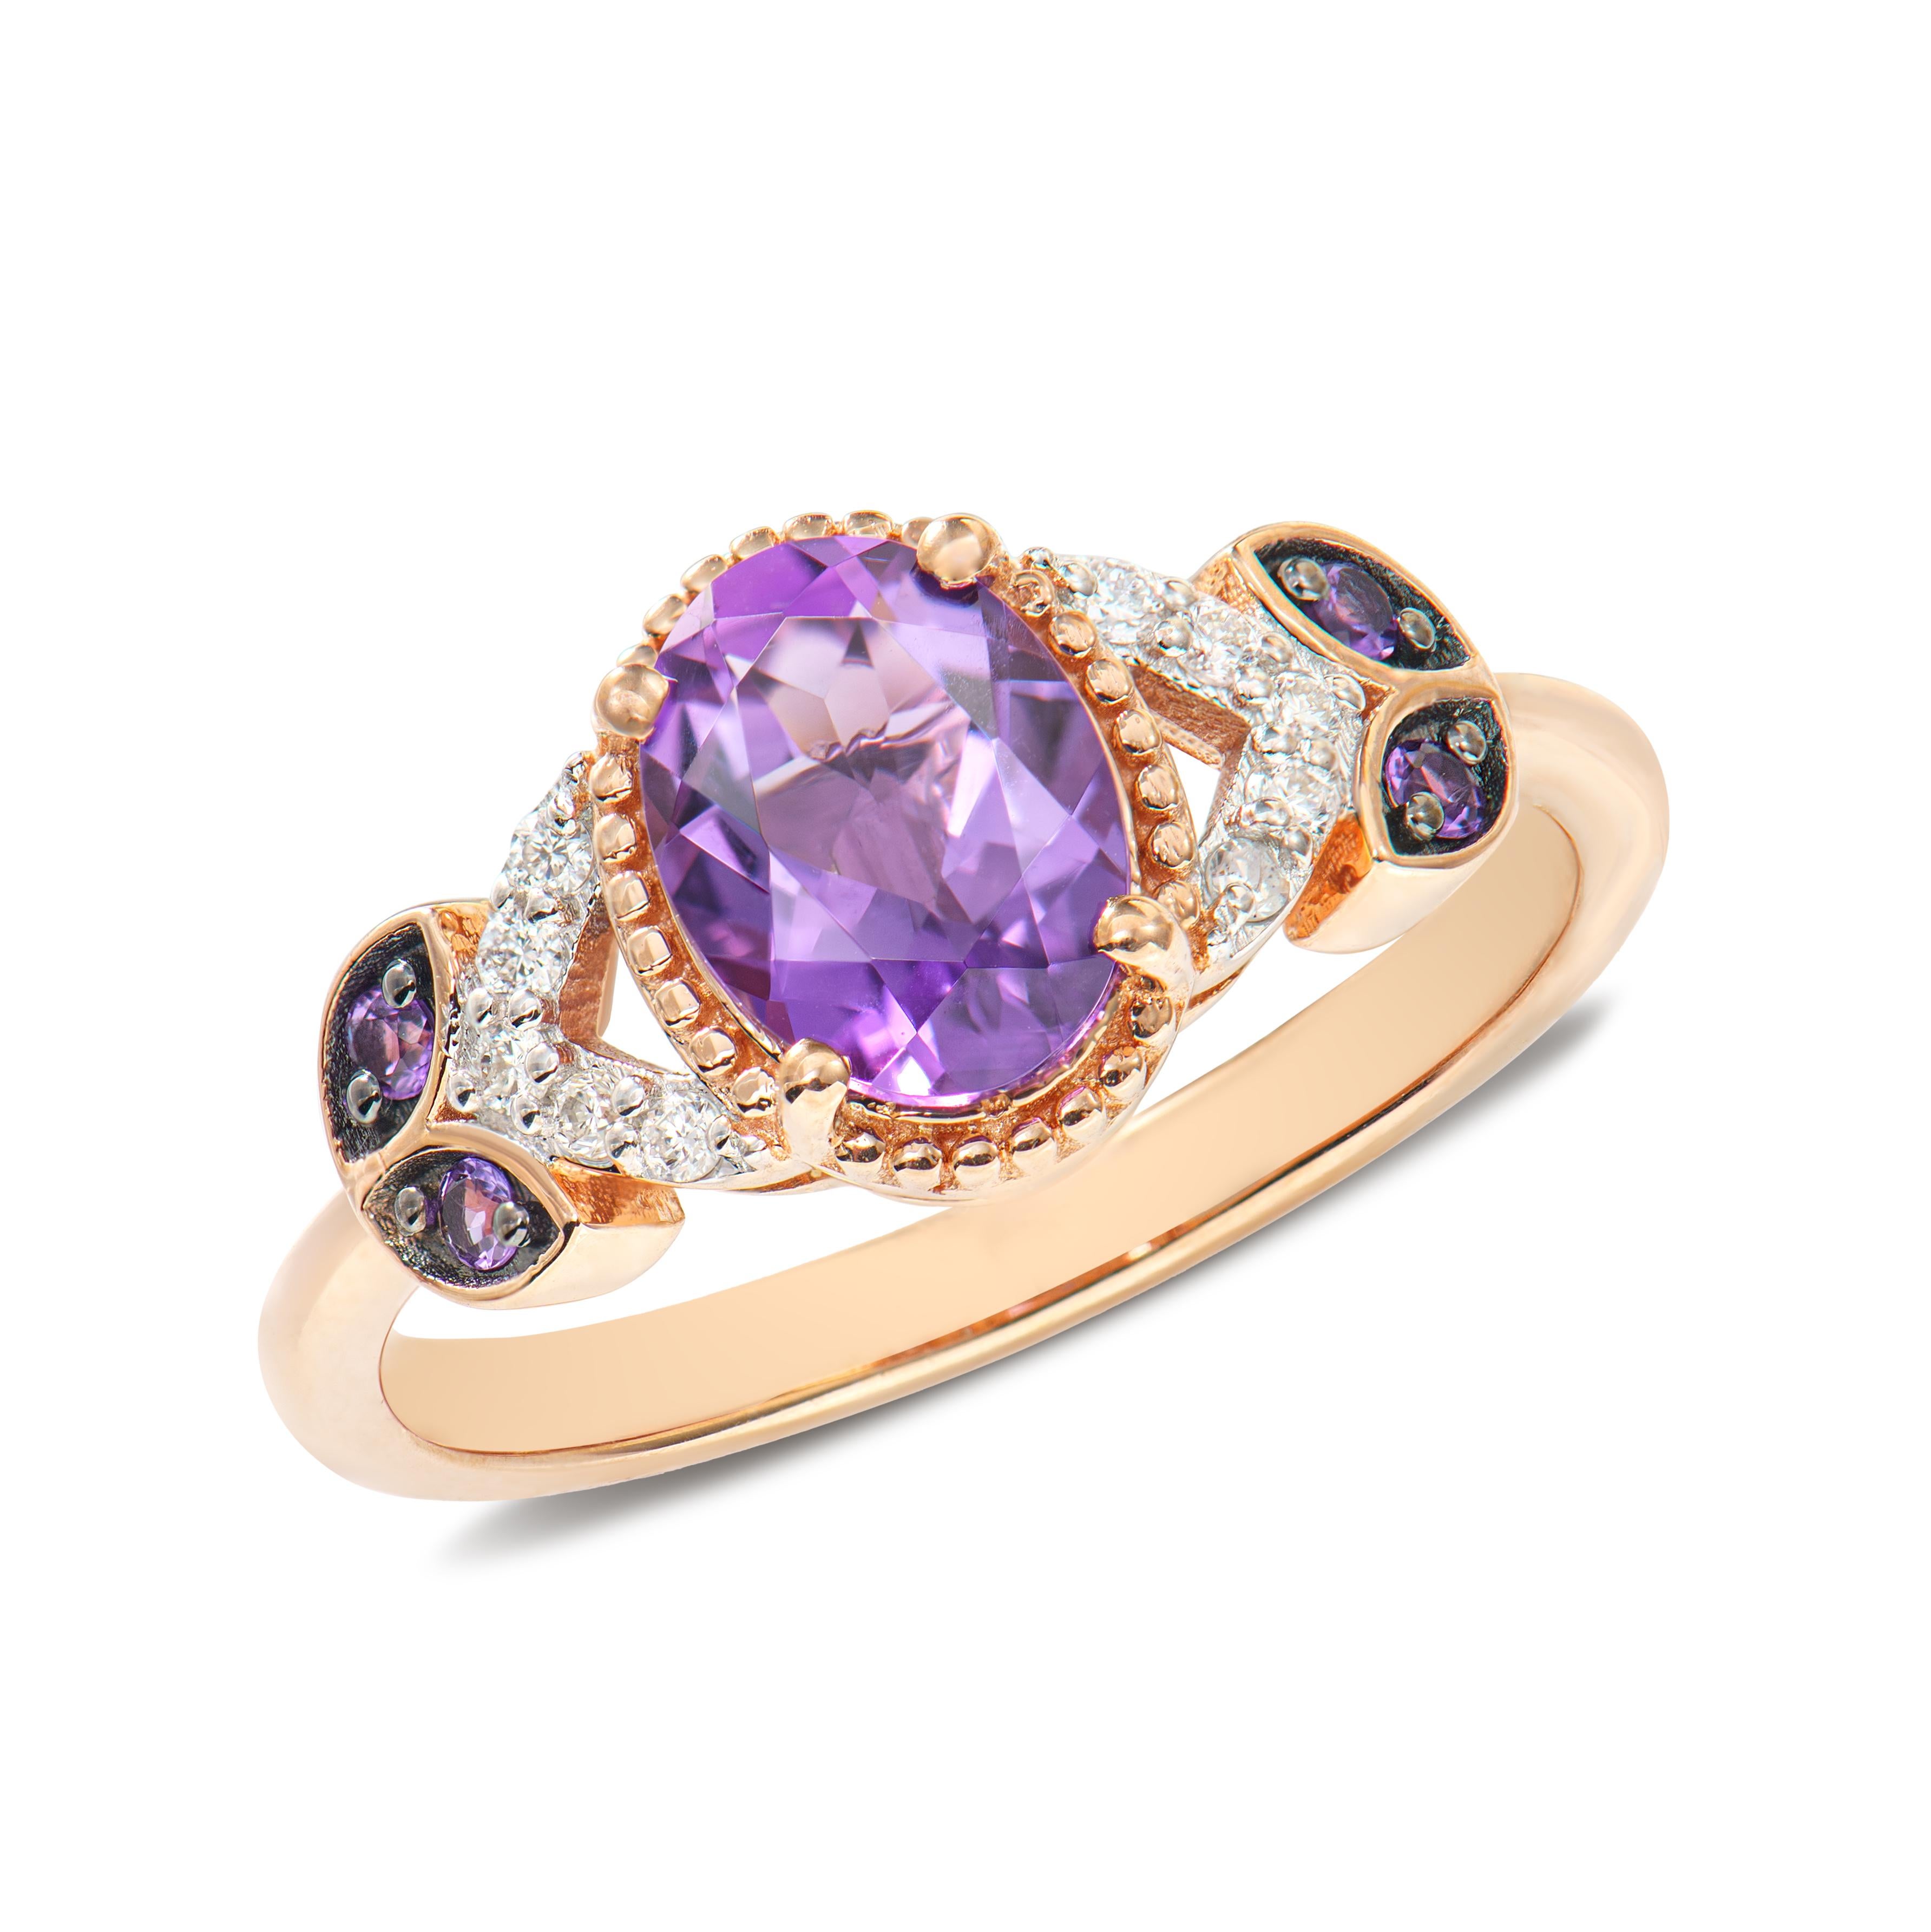 Oval Cut 1.02 Carat Amethyst Fancy Ring in 14Karat Rose Gold with White Diamond.   For Sale